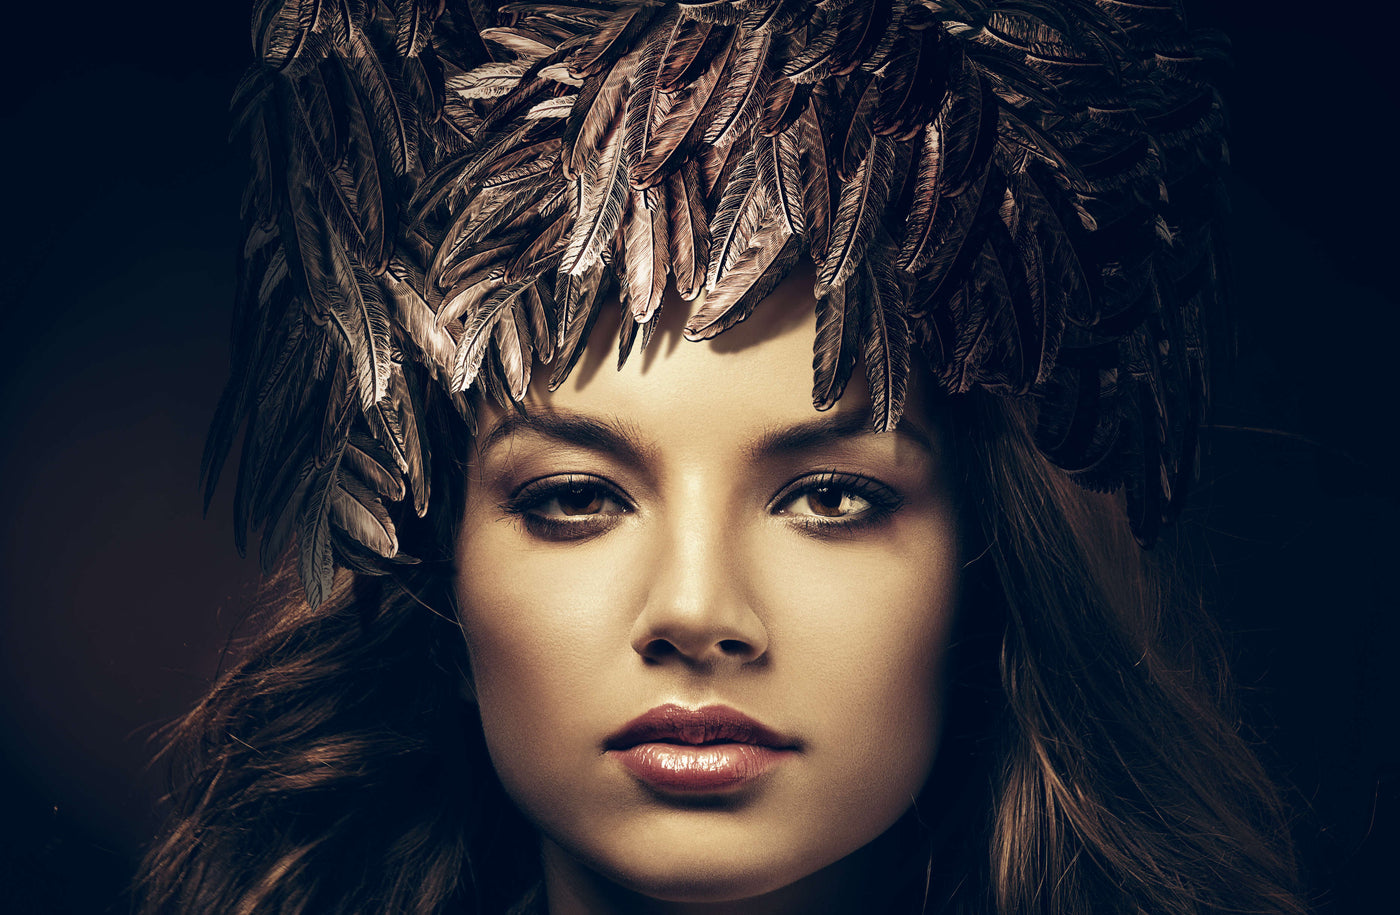 Feathers For Millinery